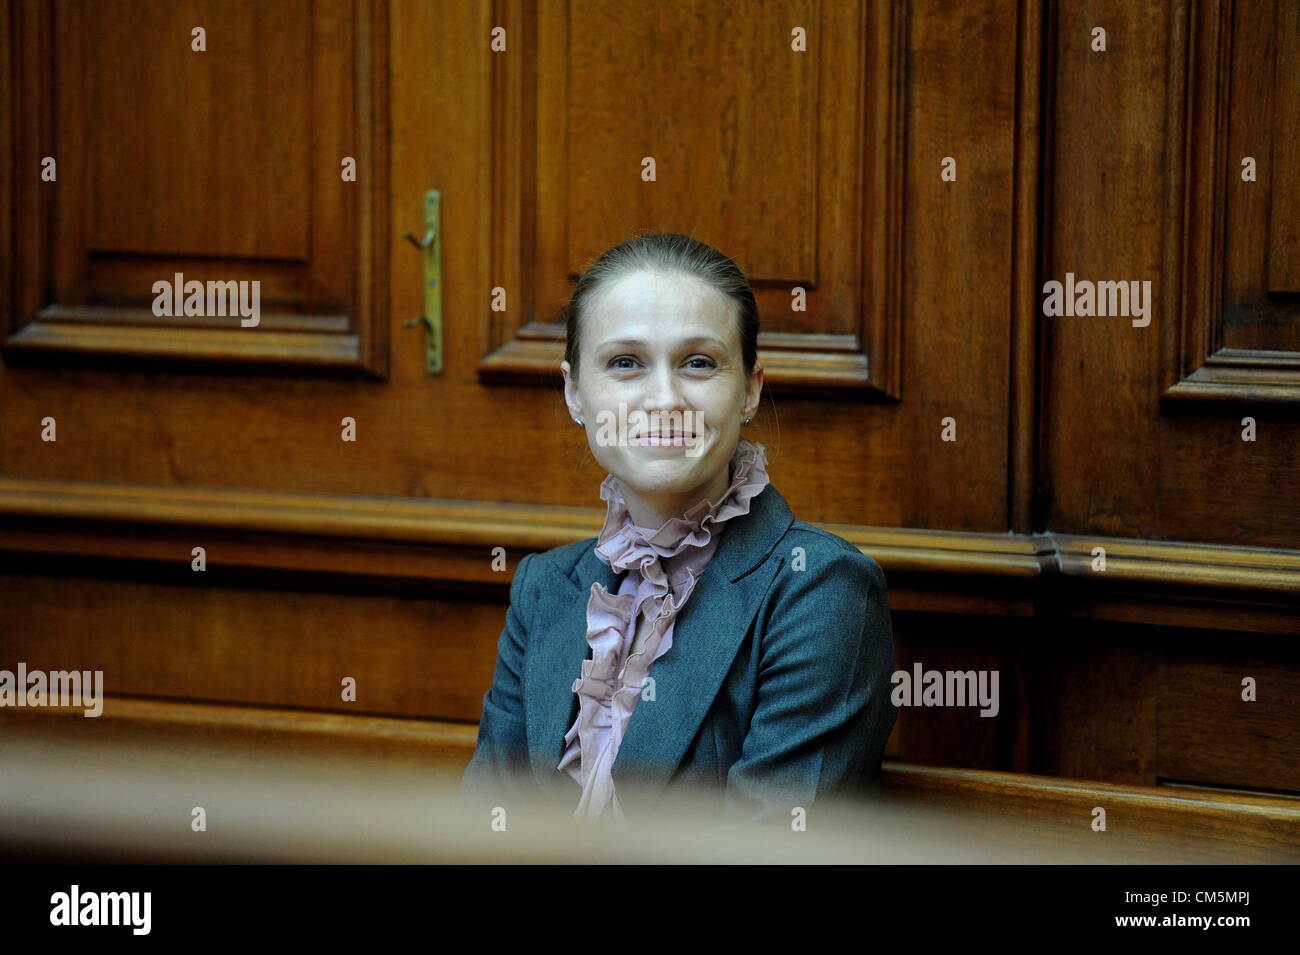 CAPE TOWN, SOUTH AFRICA: Pathologist Dr Janette Verster testifies in the Cape High Court on October 10, 2012 during the trial of Xolile Mngeni who is accused of murdering British tourist Anni Dewani in Cape Town, South Africa.  Mngeni stands accused of shooting Anni, in a murder allegedly plotted by her British husband Shrien Dewani. (Photo by Gallo Images / Foto24 / Lulama Zenzile) Stock Photo